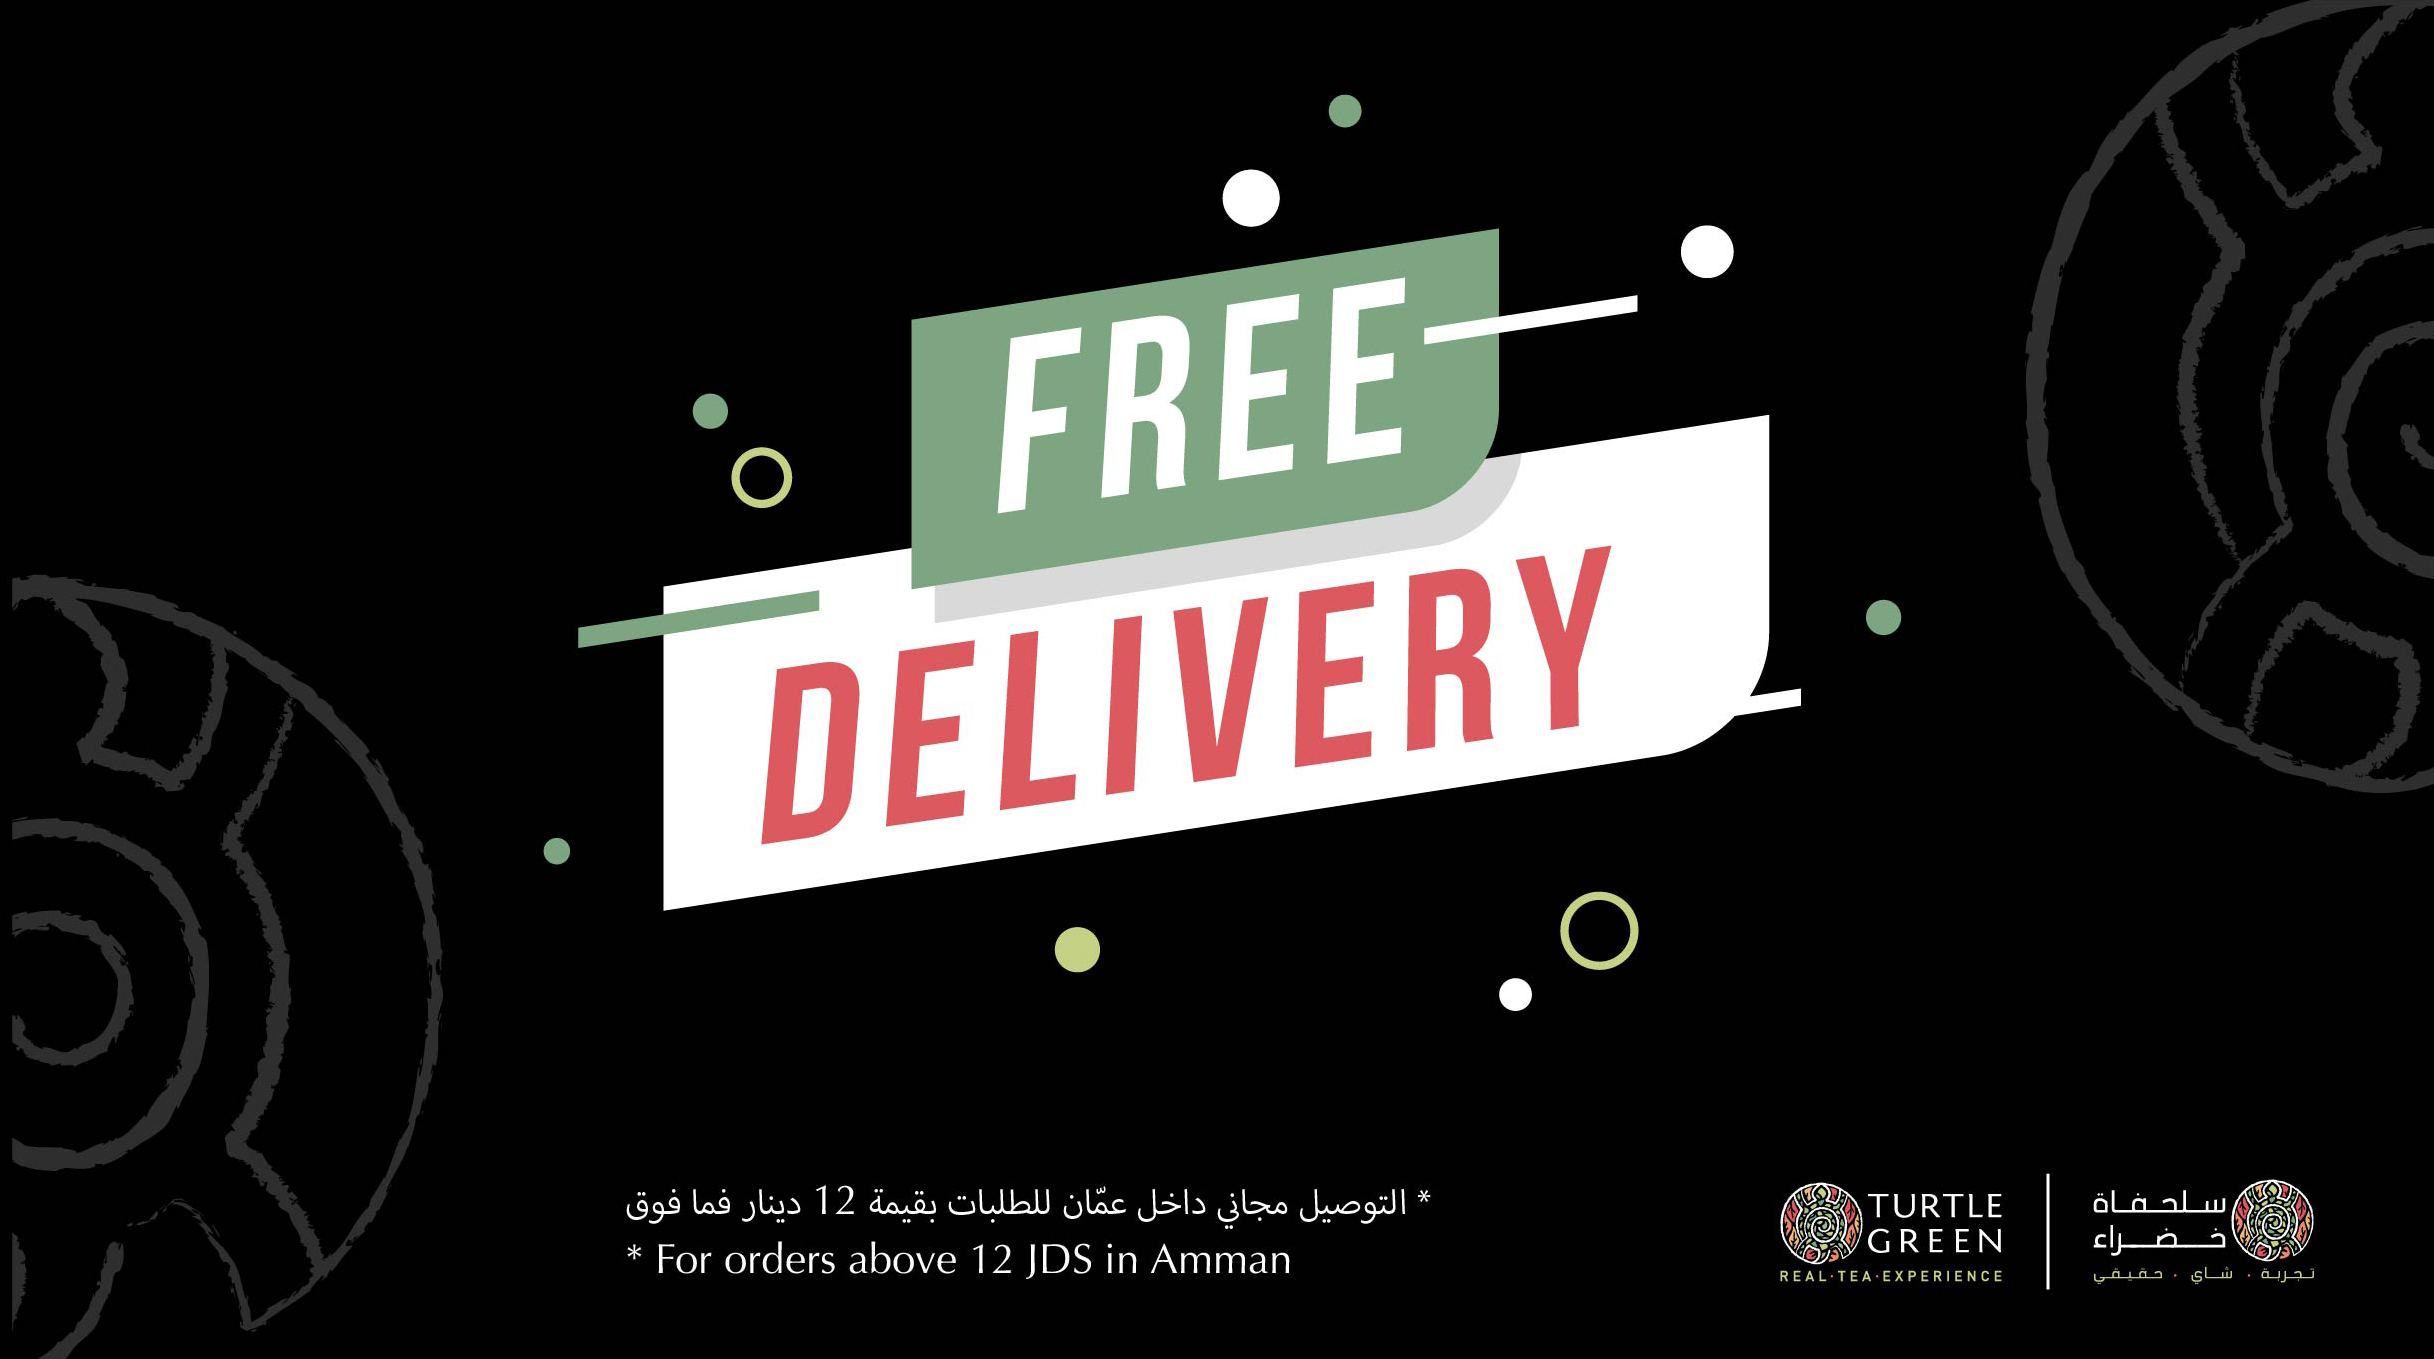 Free delivery 2